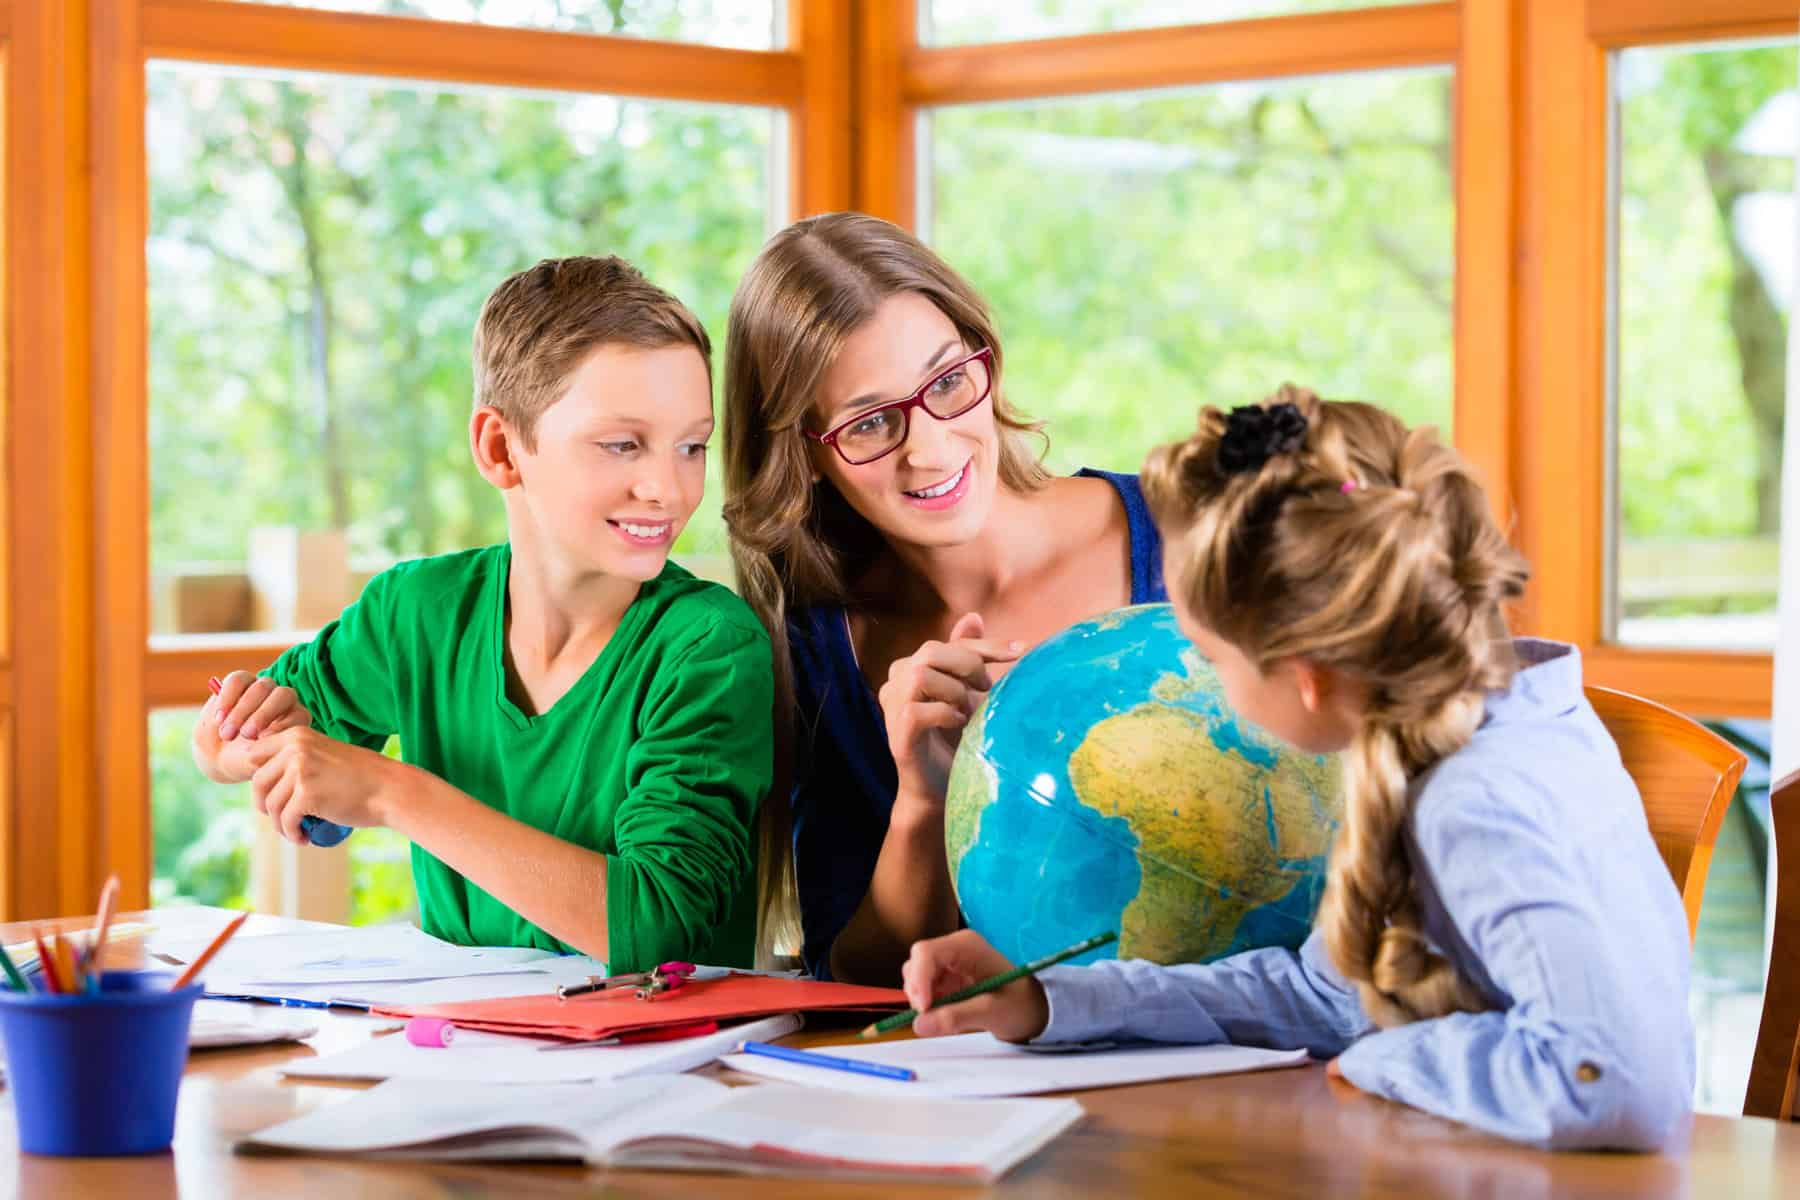 Homeschool students examining a globe in accordance with their state's homeschool laws